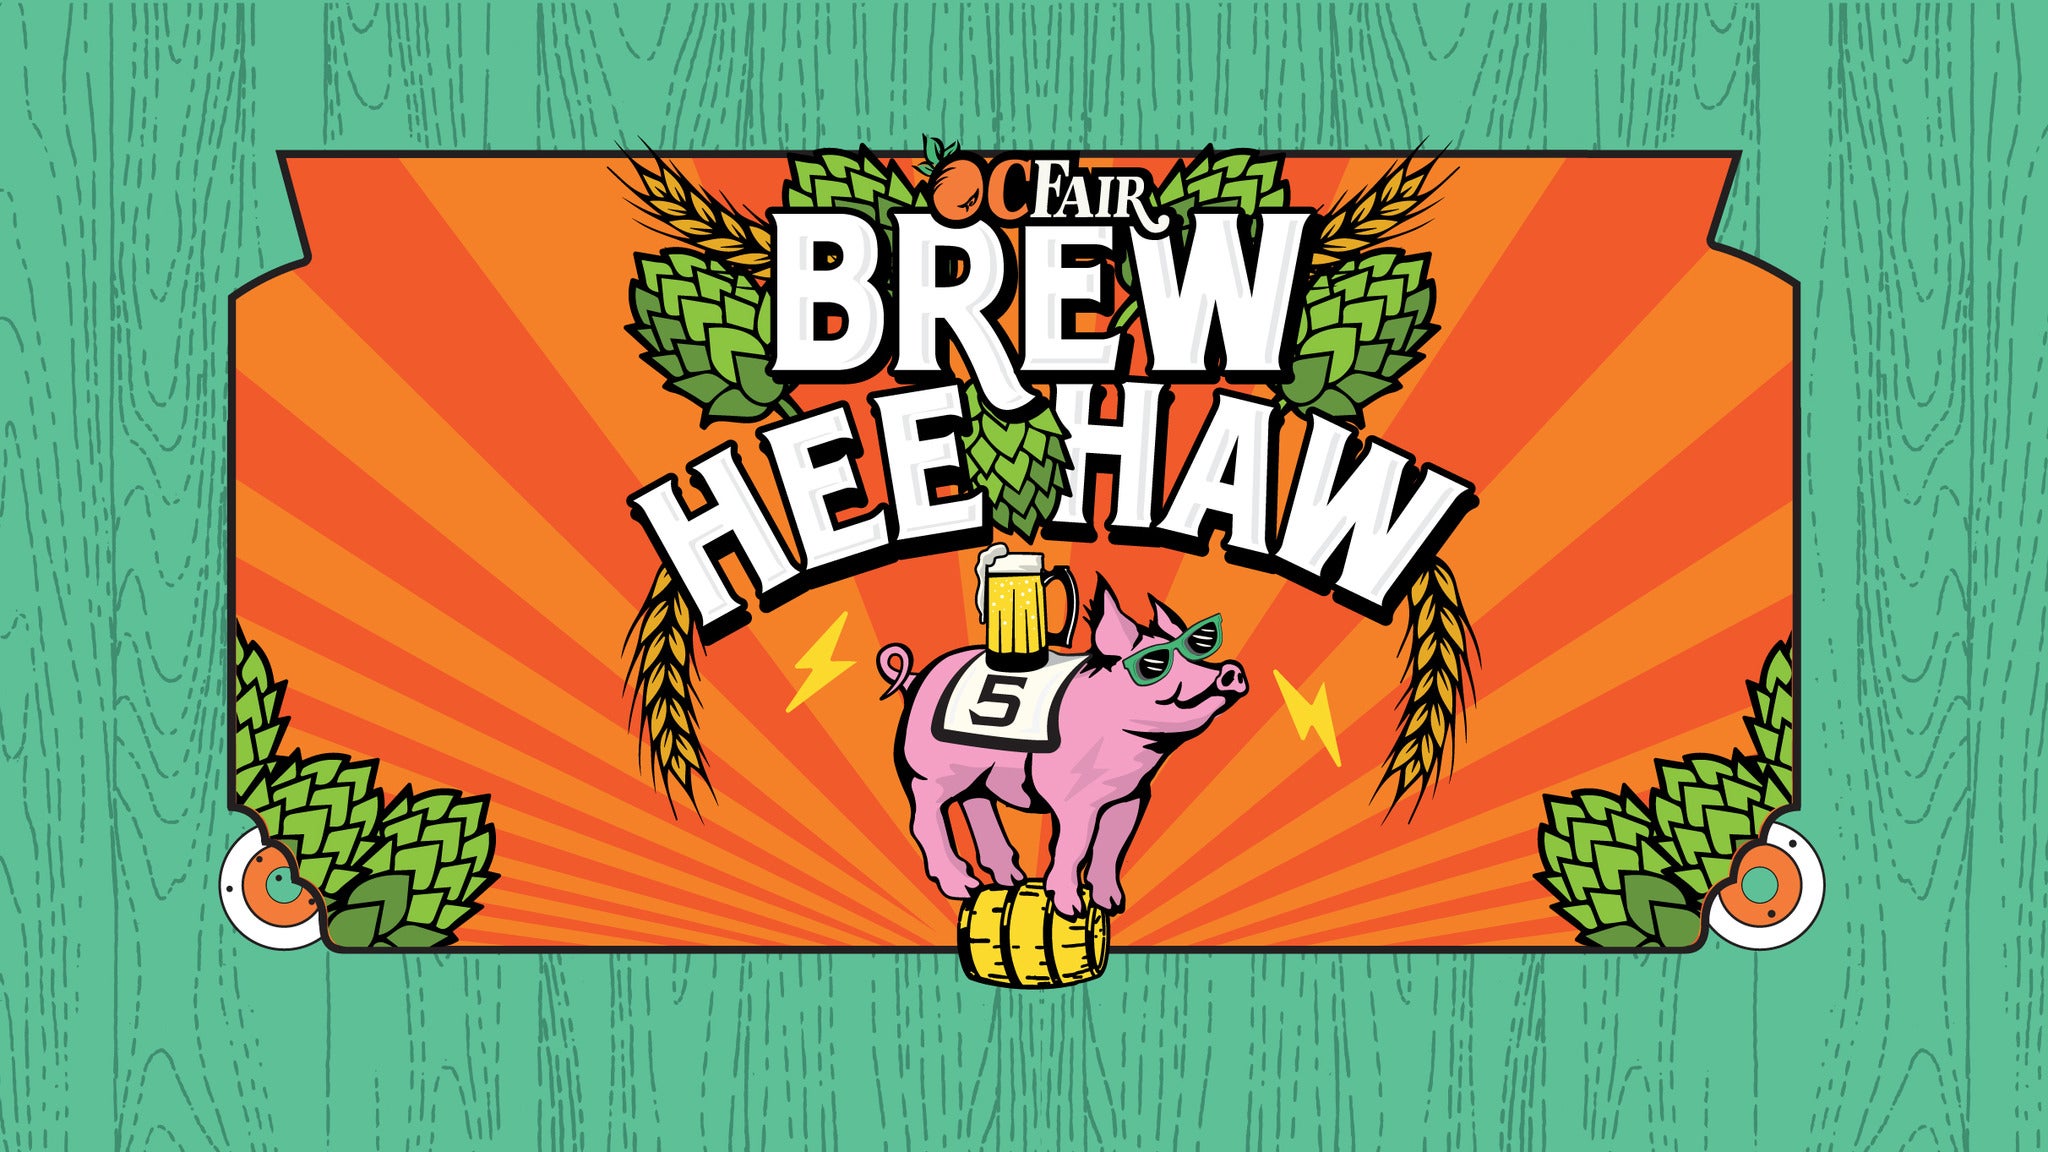 OC Brew Hee Haw - A Craft Beer Round-up - 07/16/22 Vip Admission